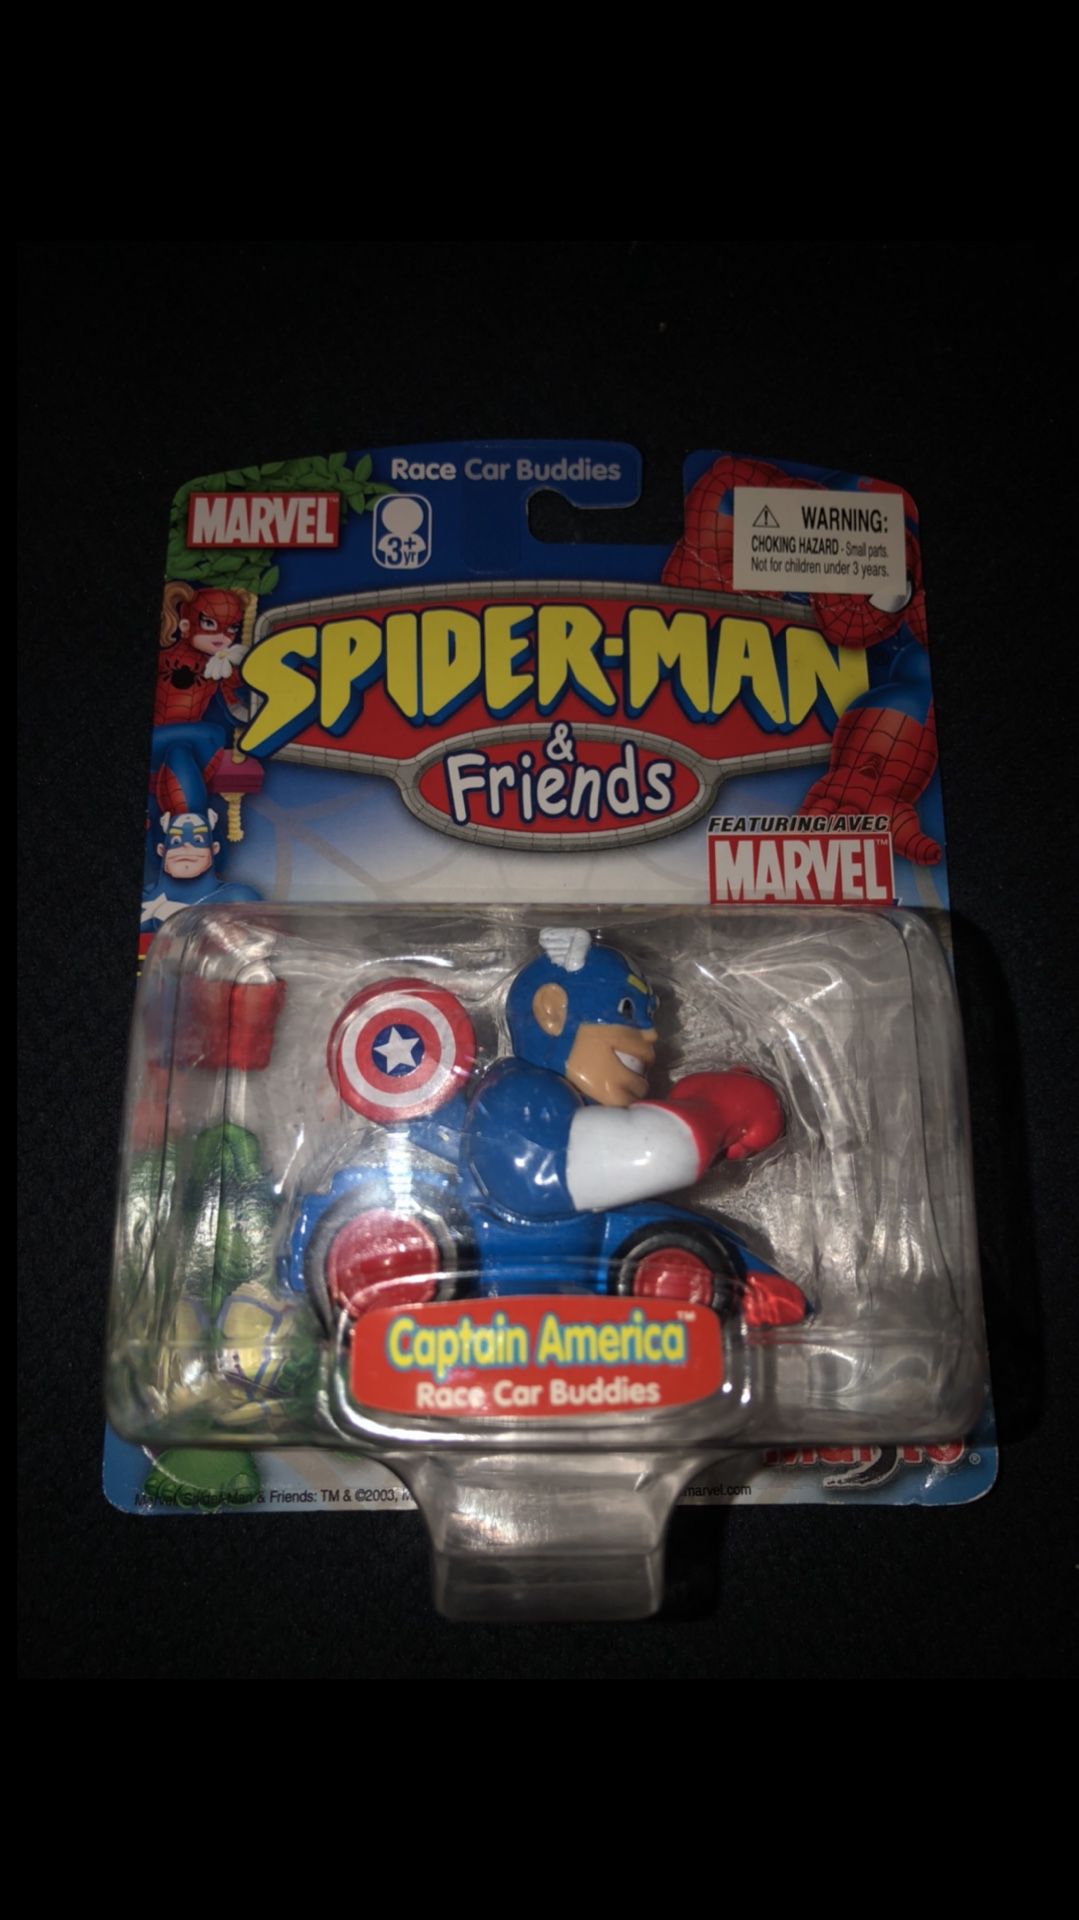 Marvel Spiderman And Friends Race Car Buddies Captain America